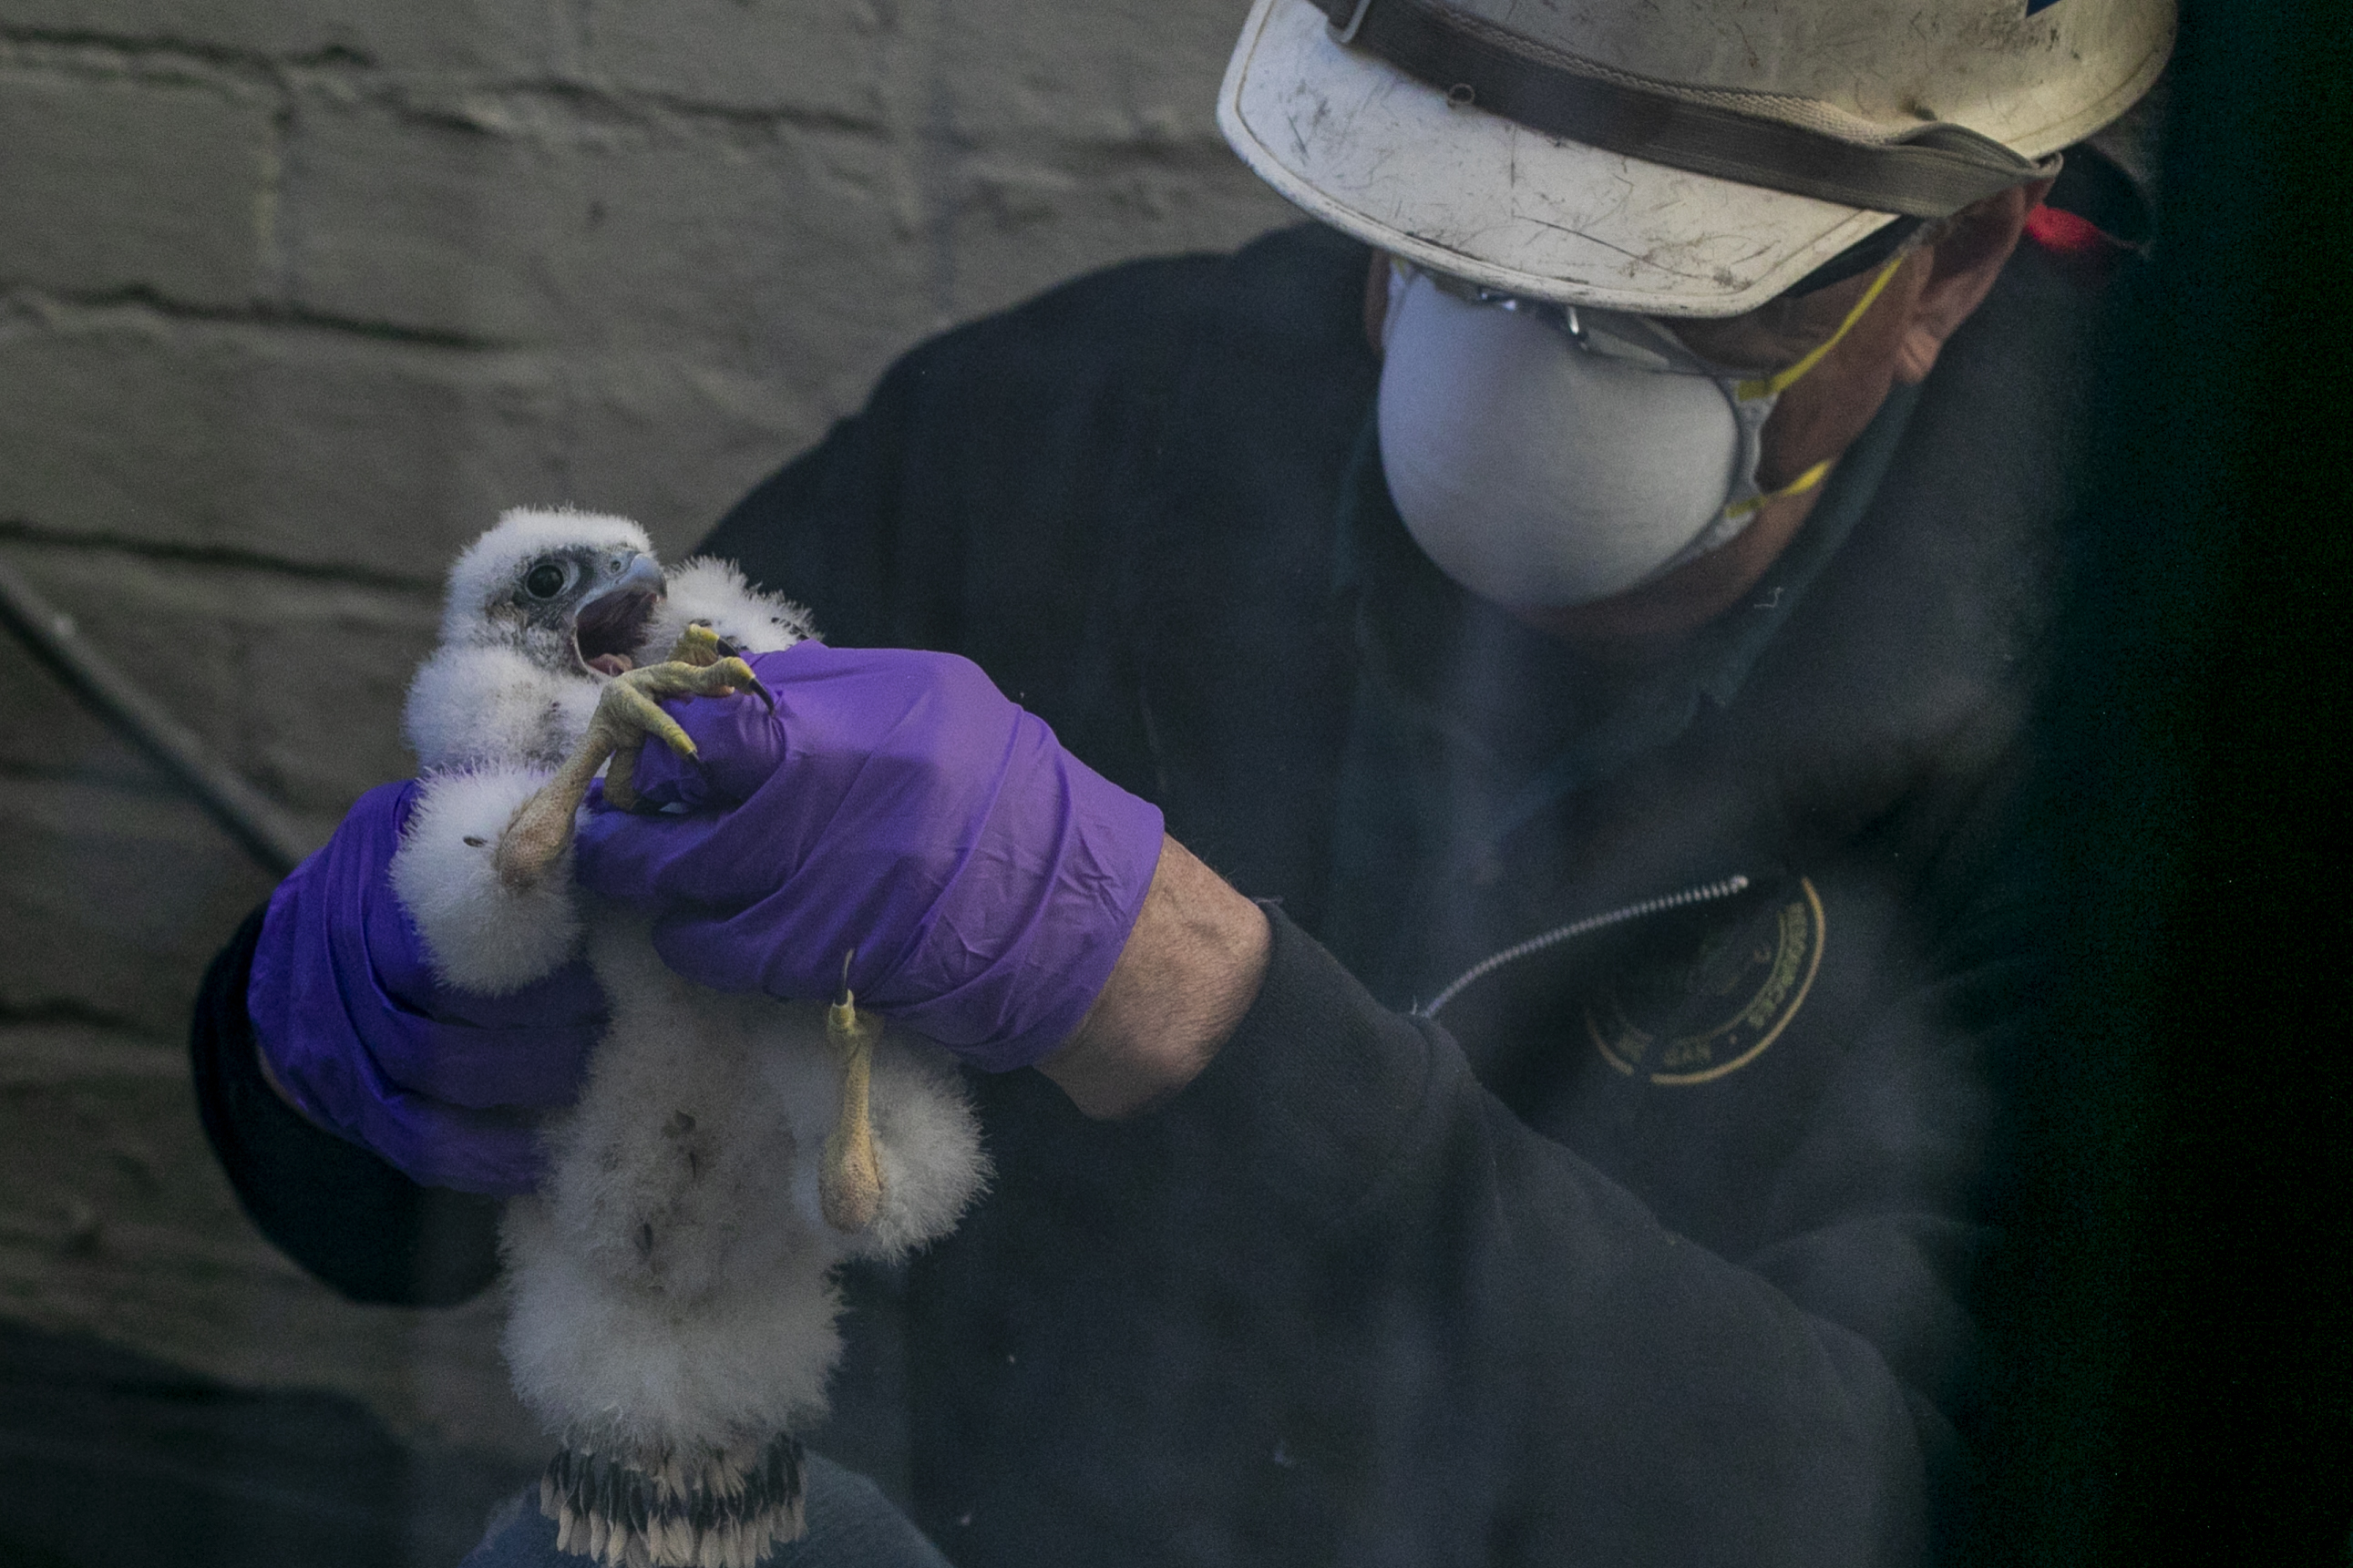 Three eyases are banded for state and national study by the Michigan Department of Natural Resources in the window well of the Fifth/Third Bank Building in downtown Kalamazoo, Michigan on Monday, May 23, 2022. This visit finally allowed the Audubon Society to confirm the genders of the baby peregrine falcons: two males and one female. (Gabi Broekema | MLive.com)